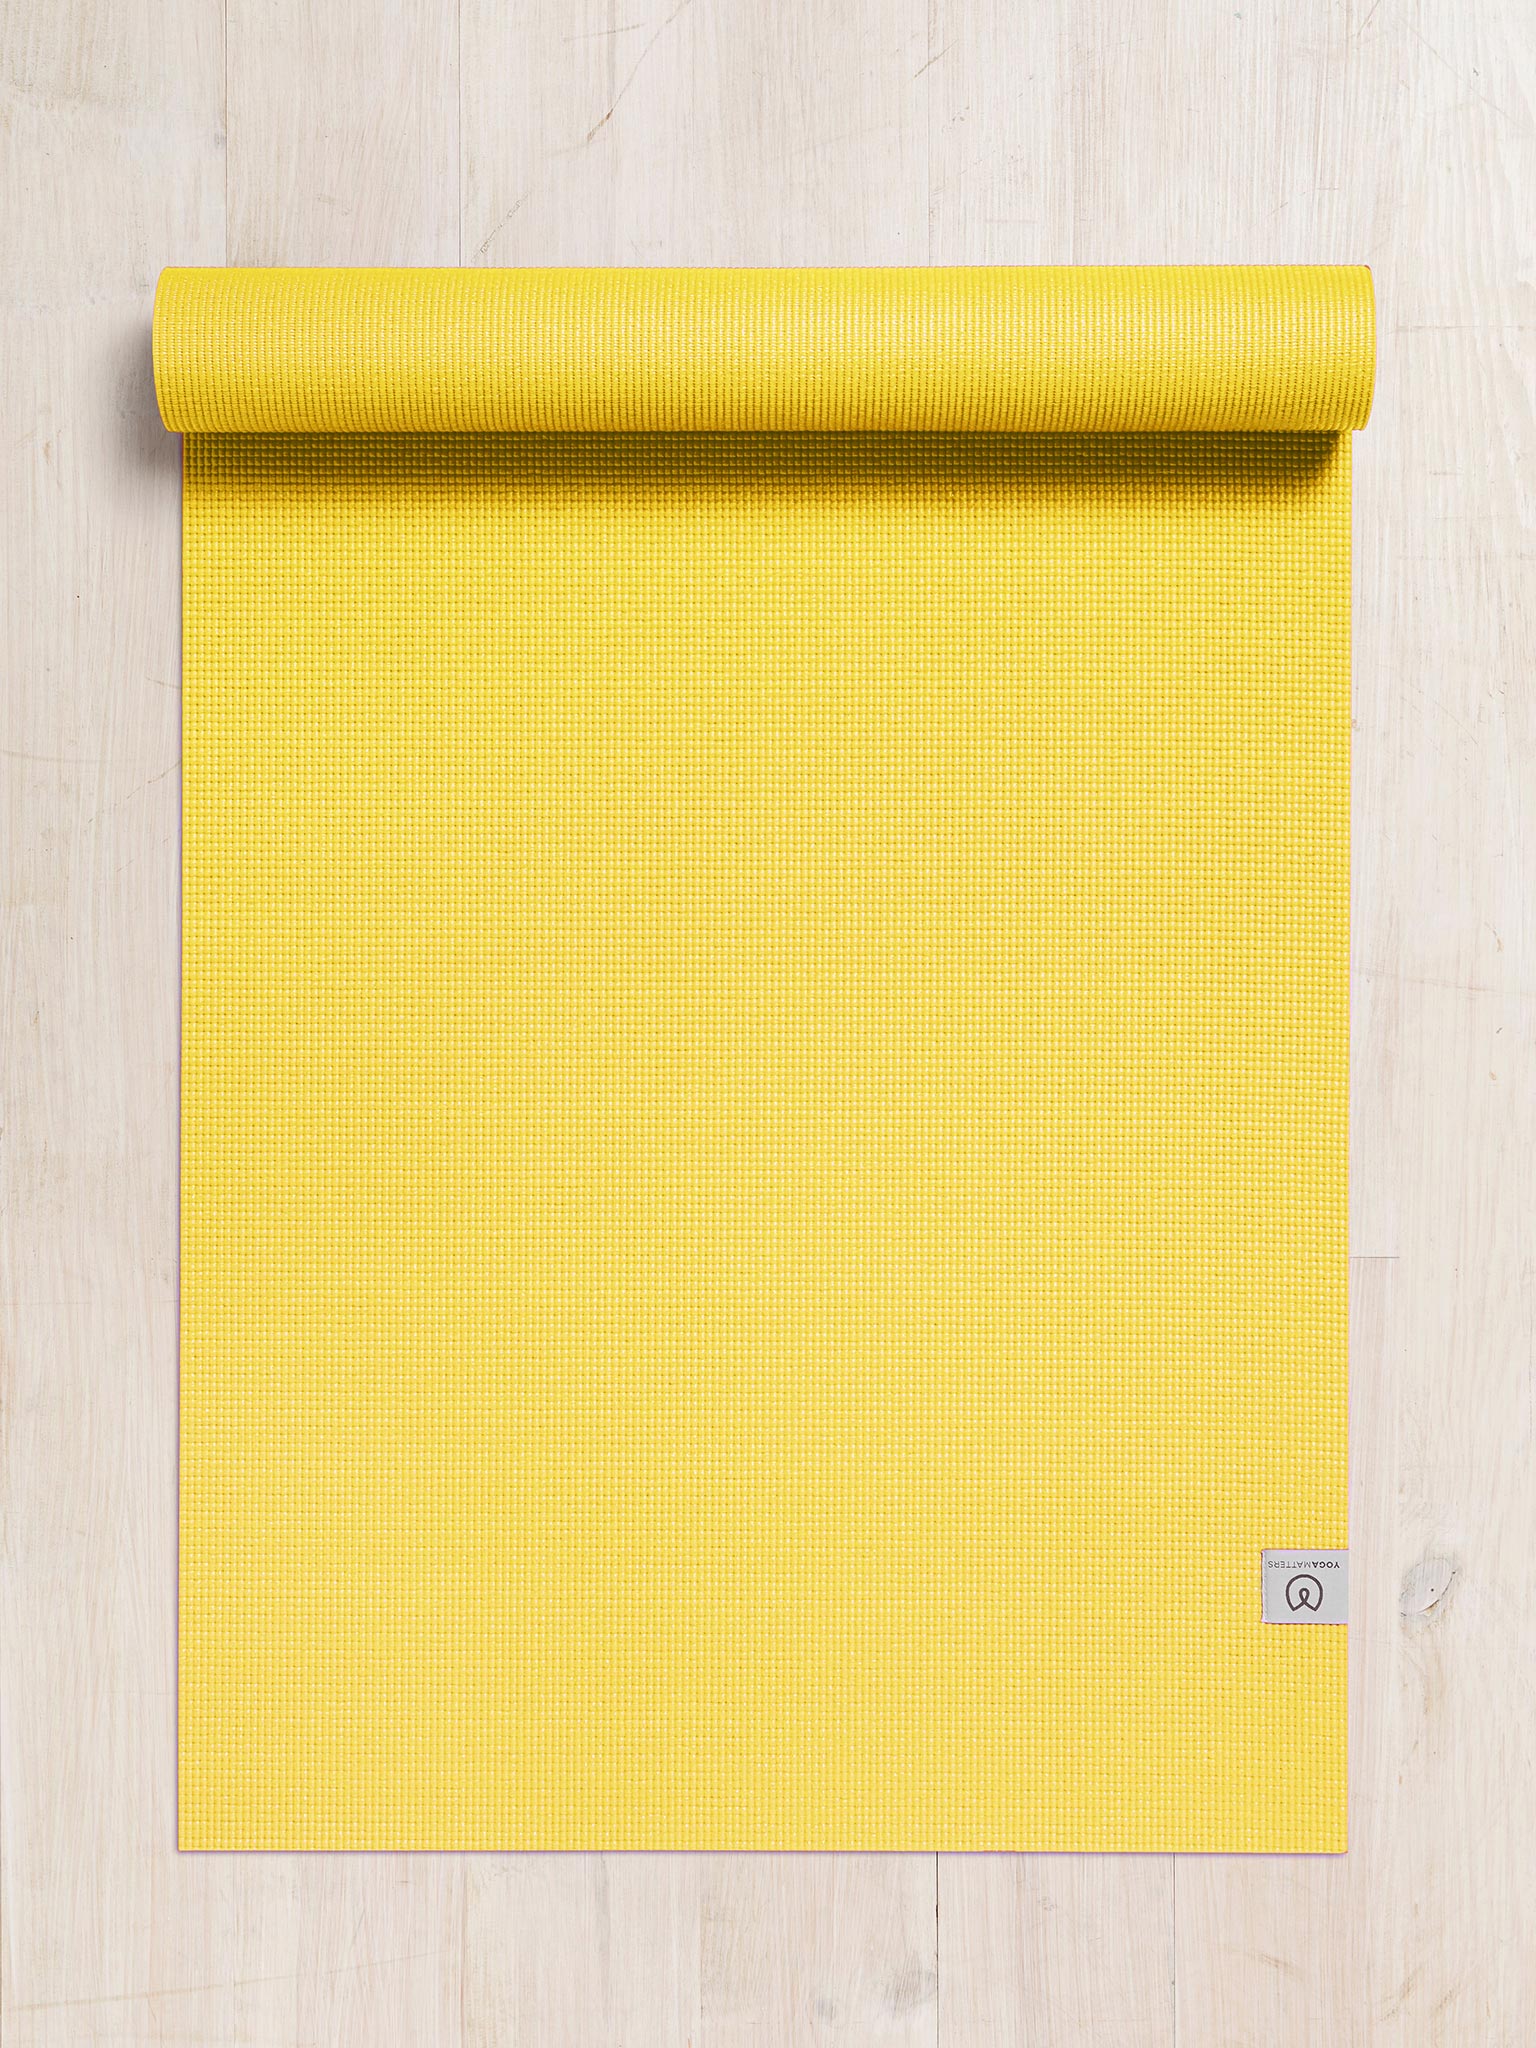 Bright yellow textured yoga mat partially rolled at top, overhead view on wooden floor, non-slip surface, exercise equipment for fitness and meditation.